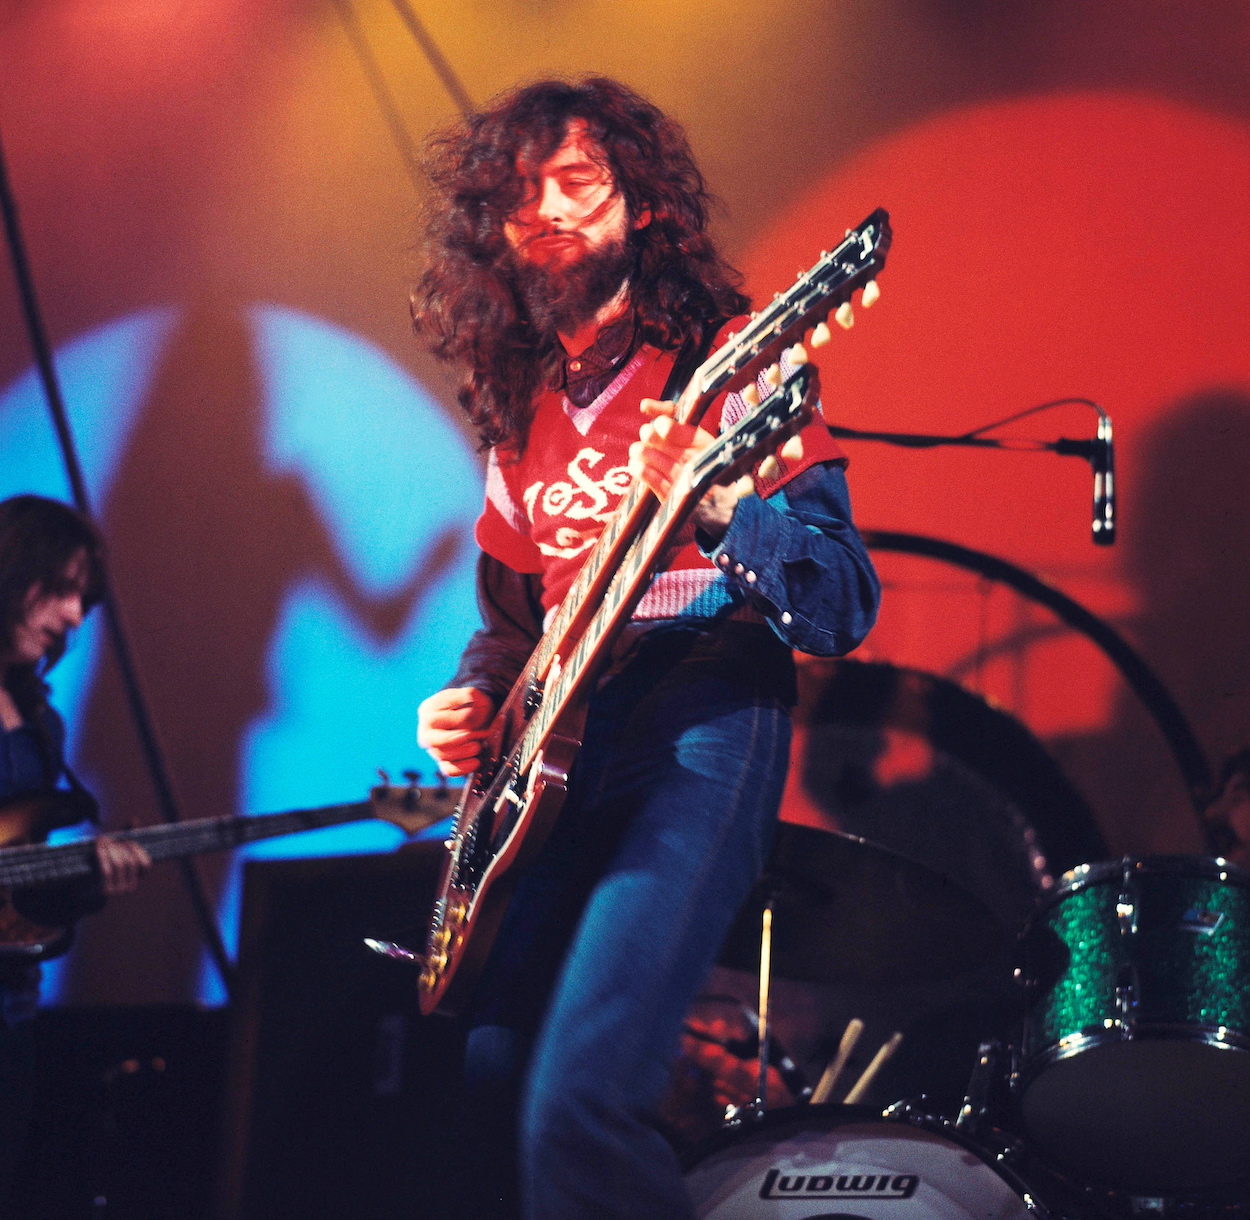 Led Zeppelin guitarist Jimmy Page plays his double-necked Gibson during a concert in London in 1971. Page once described the "eternal quality" that makes “Stairway to Heaven” an enduring classic.